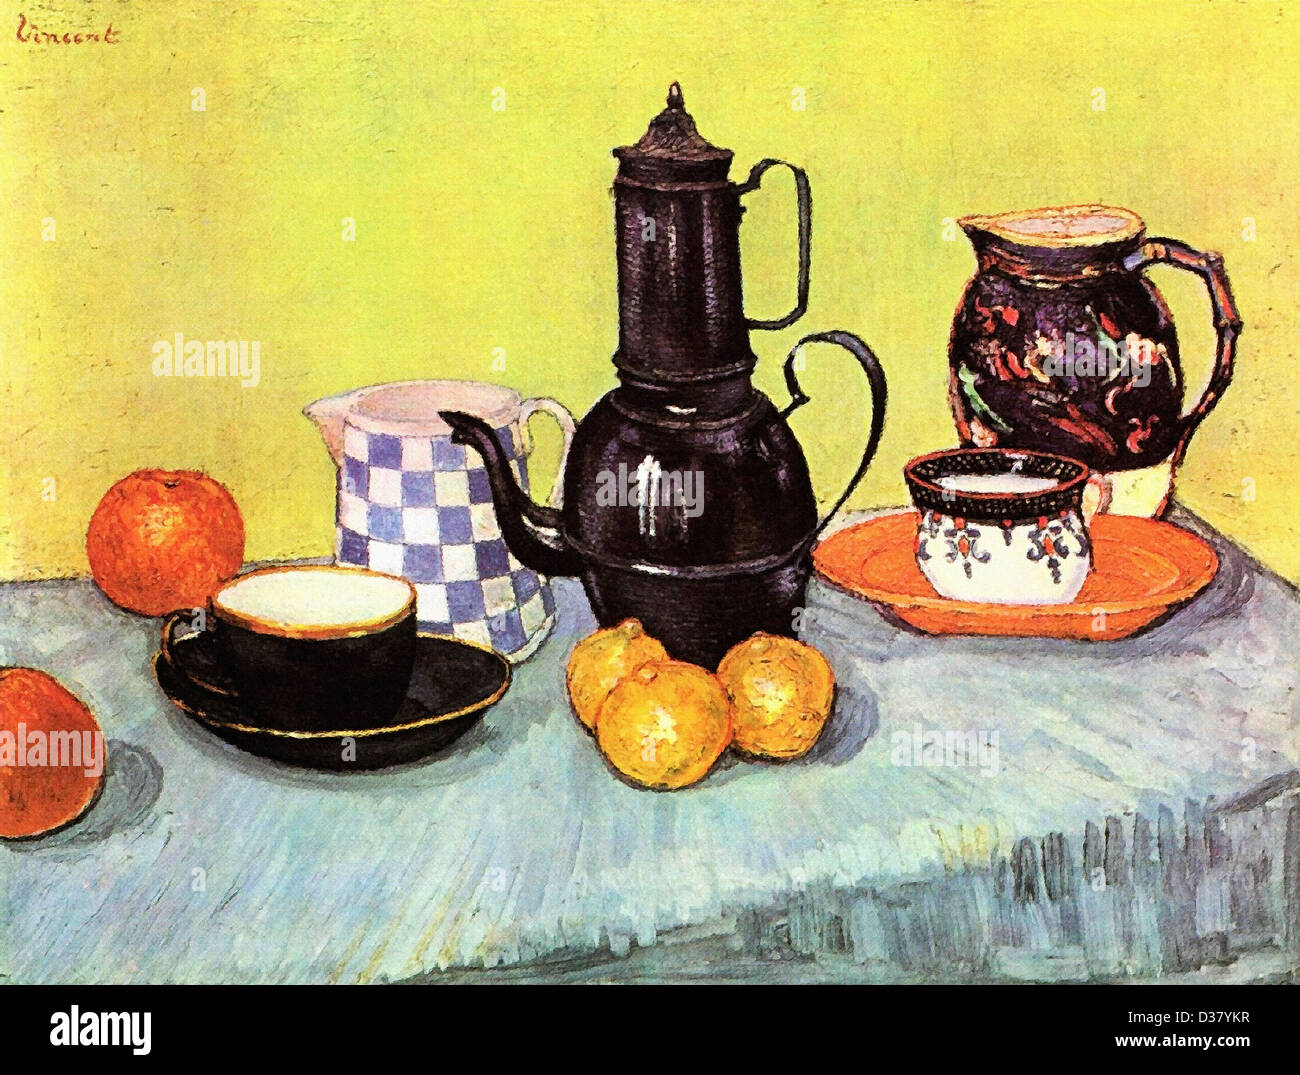 Vincent van Gogh, Still Life with Blue Enamel Coffeepot, Earthenware and Fruit. 1888. Post-Impressionism. Oil on canvas. Stock Photo